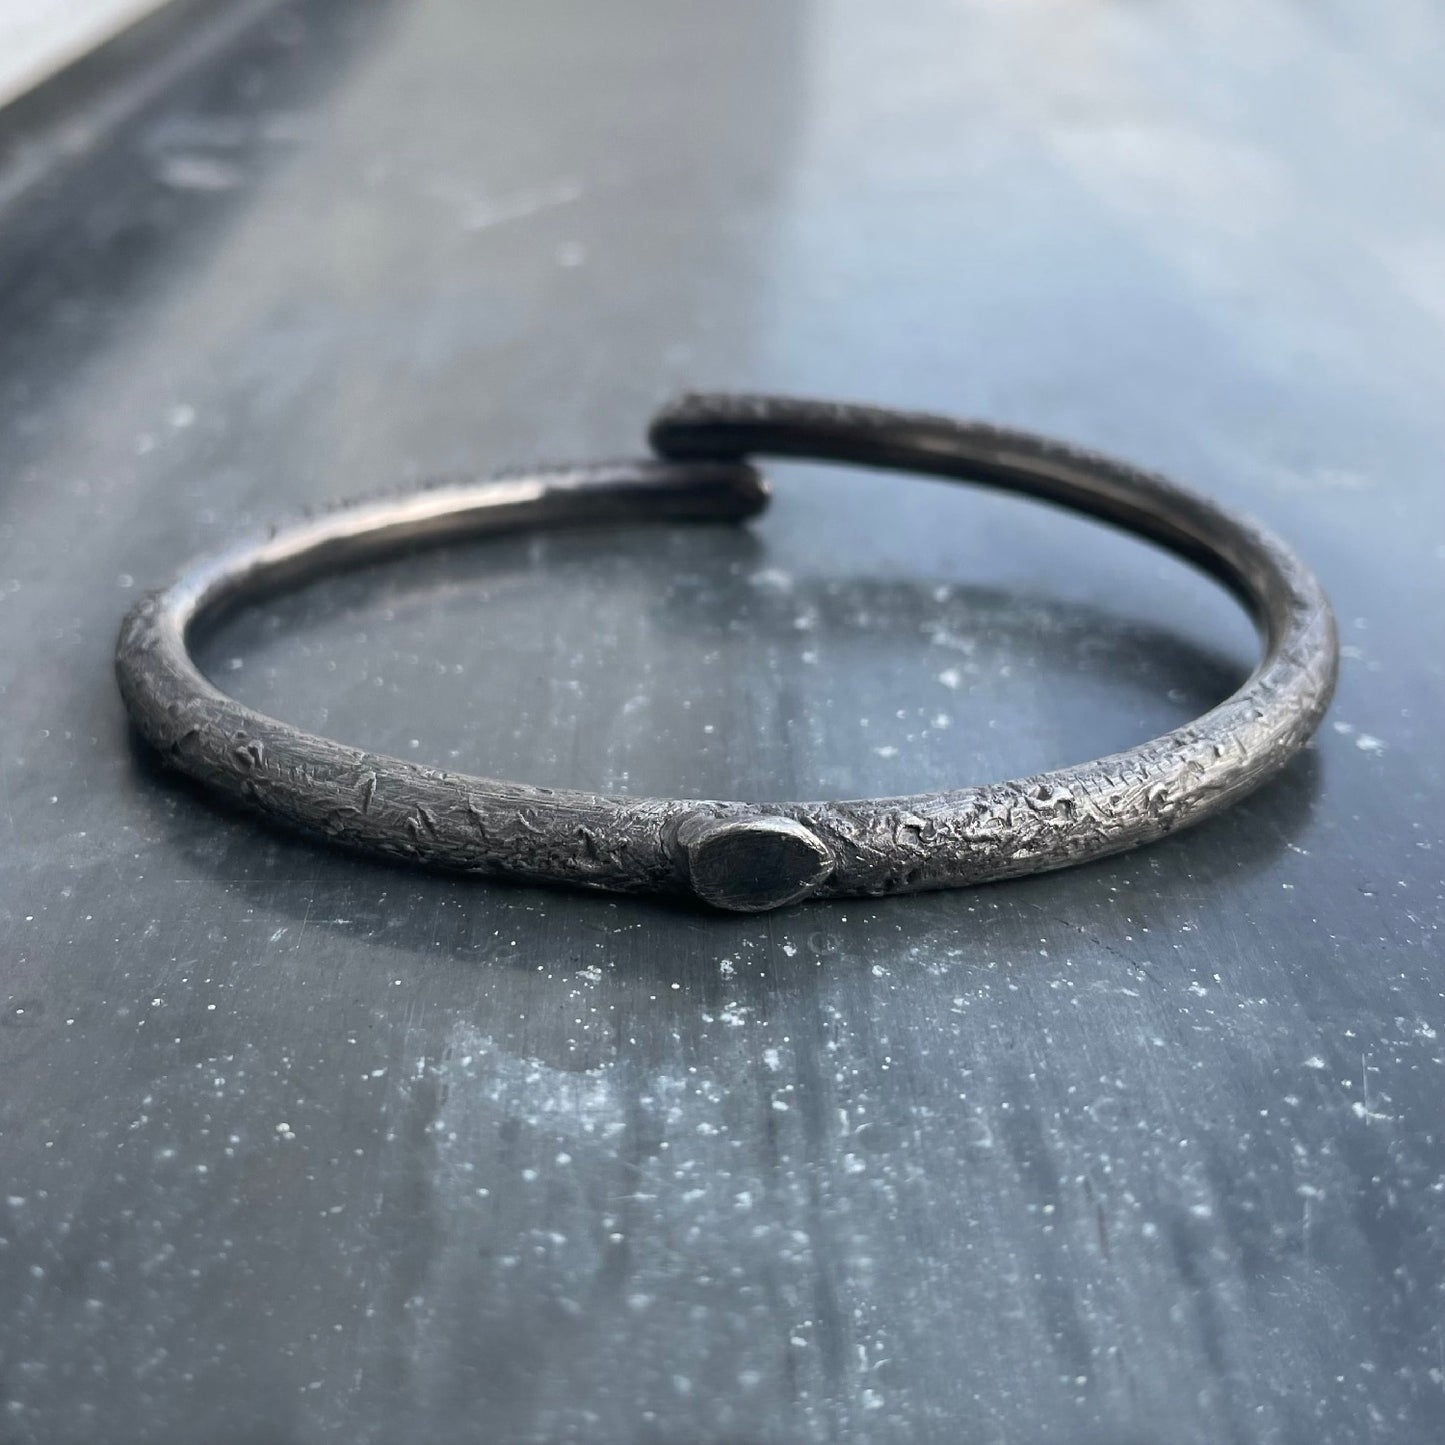 B1 bangle - Black - with rough surface structure